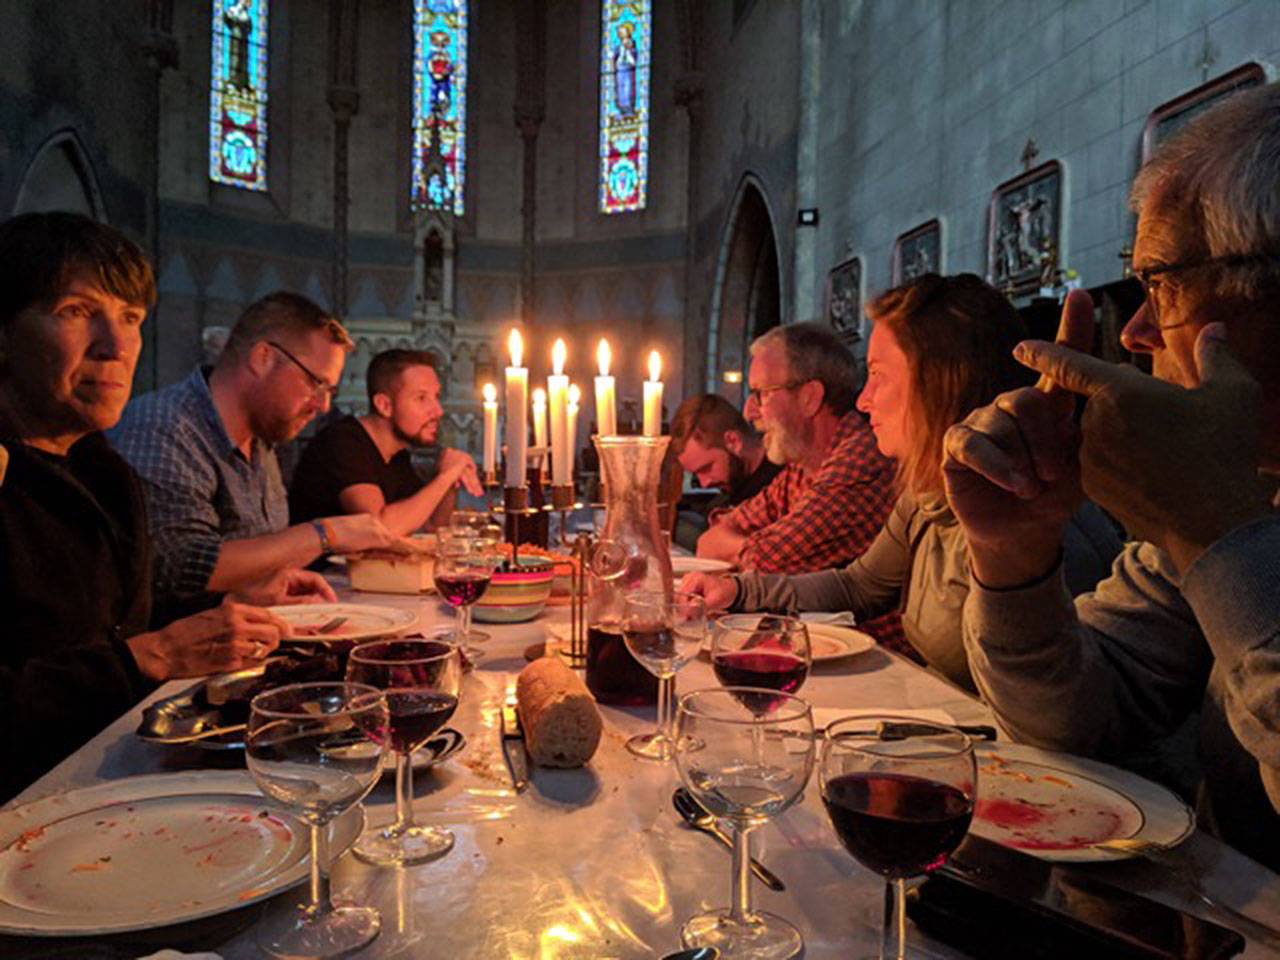 Carla Mackey photo | Pilgrims enjoy a meal in a converted cathedral.